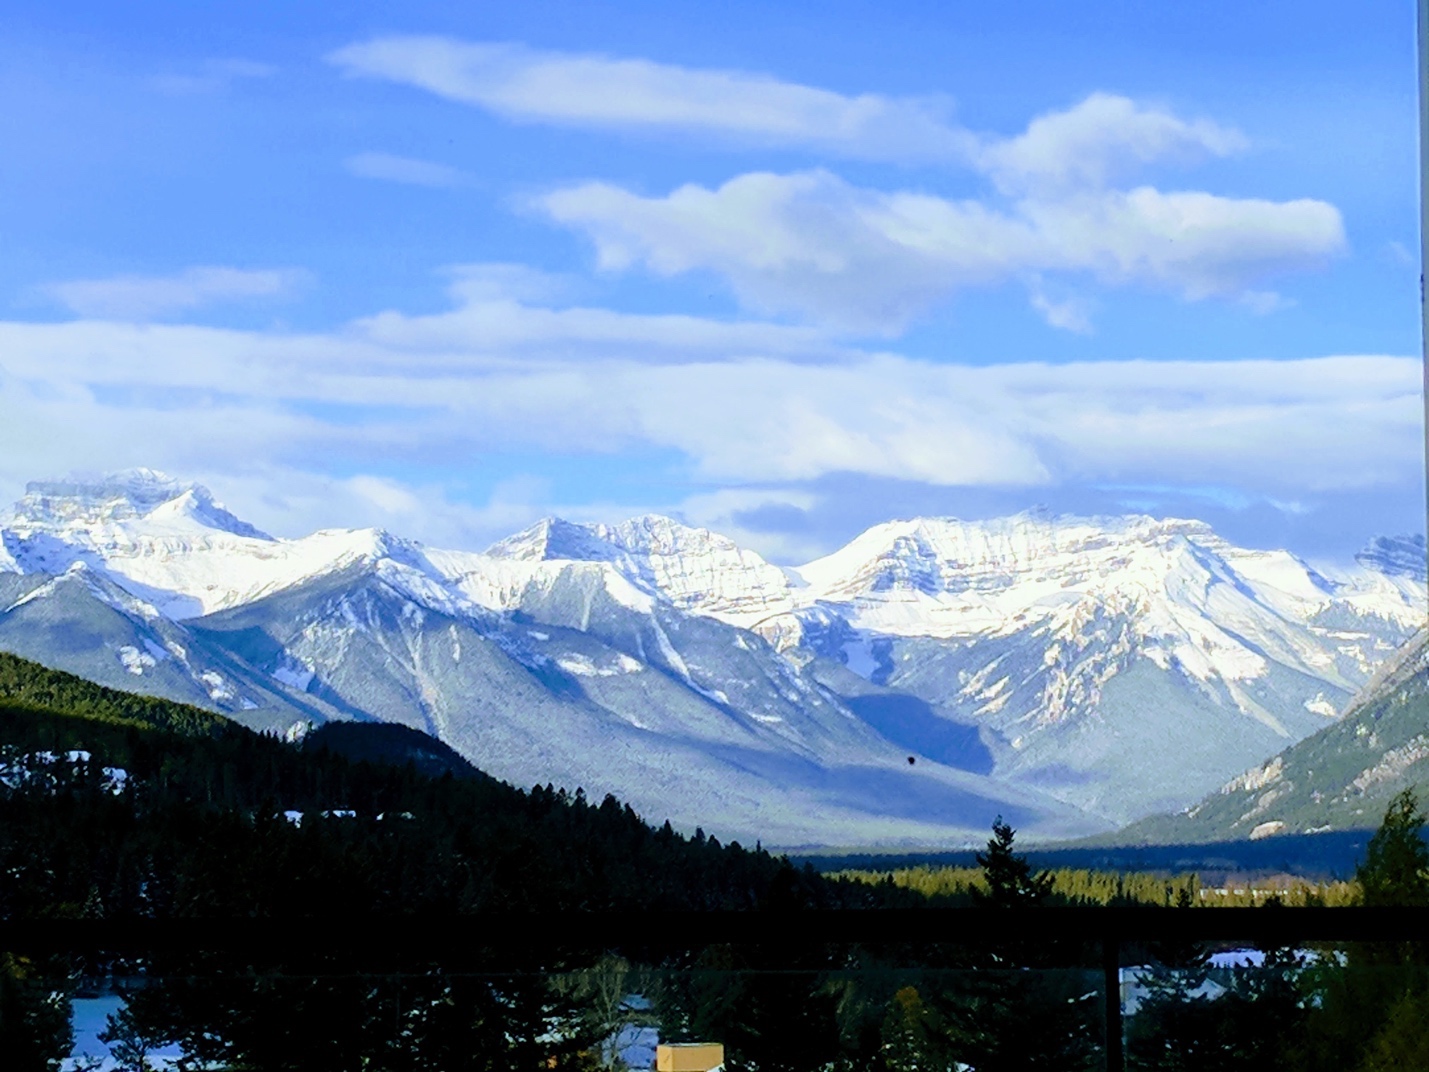 A long-shot of the Canadian Rocky Mountains. The sky is blue and a little cloudy; the mountains are snow-capped; the closer landscape includes lush green forest.]